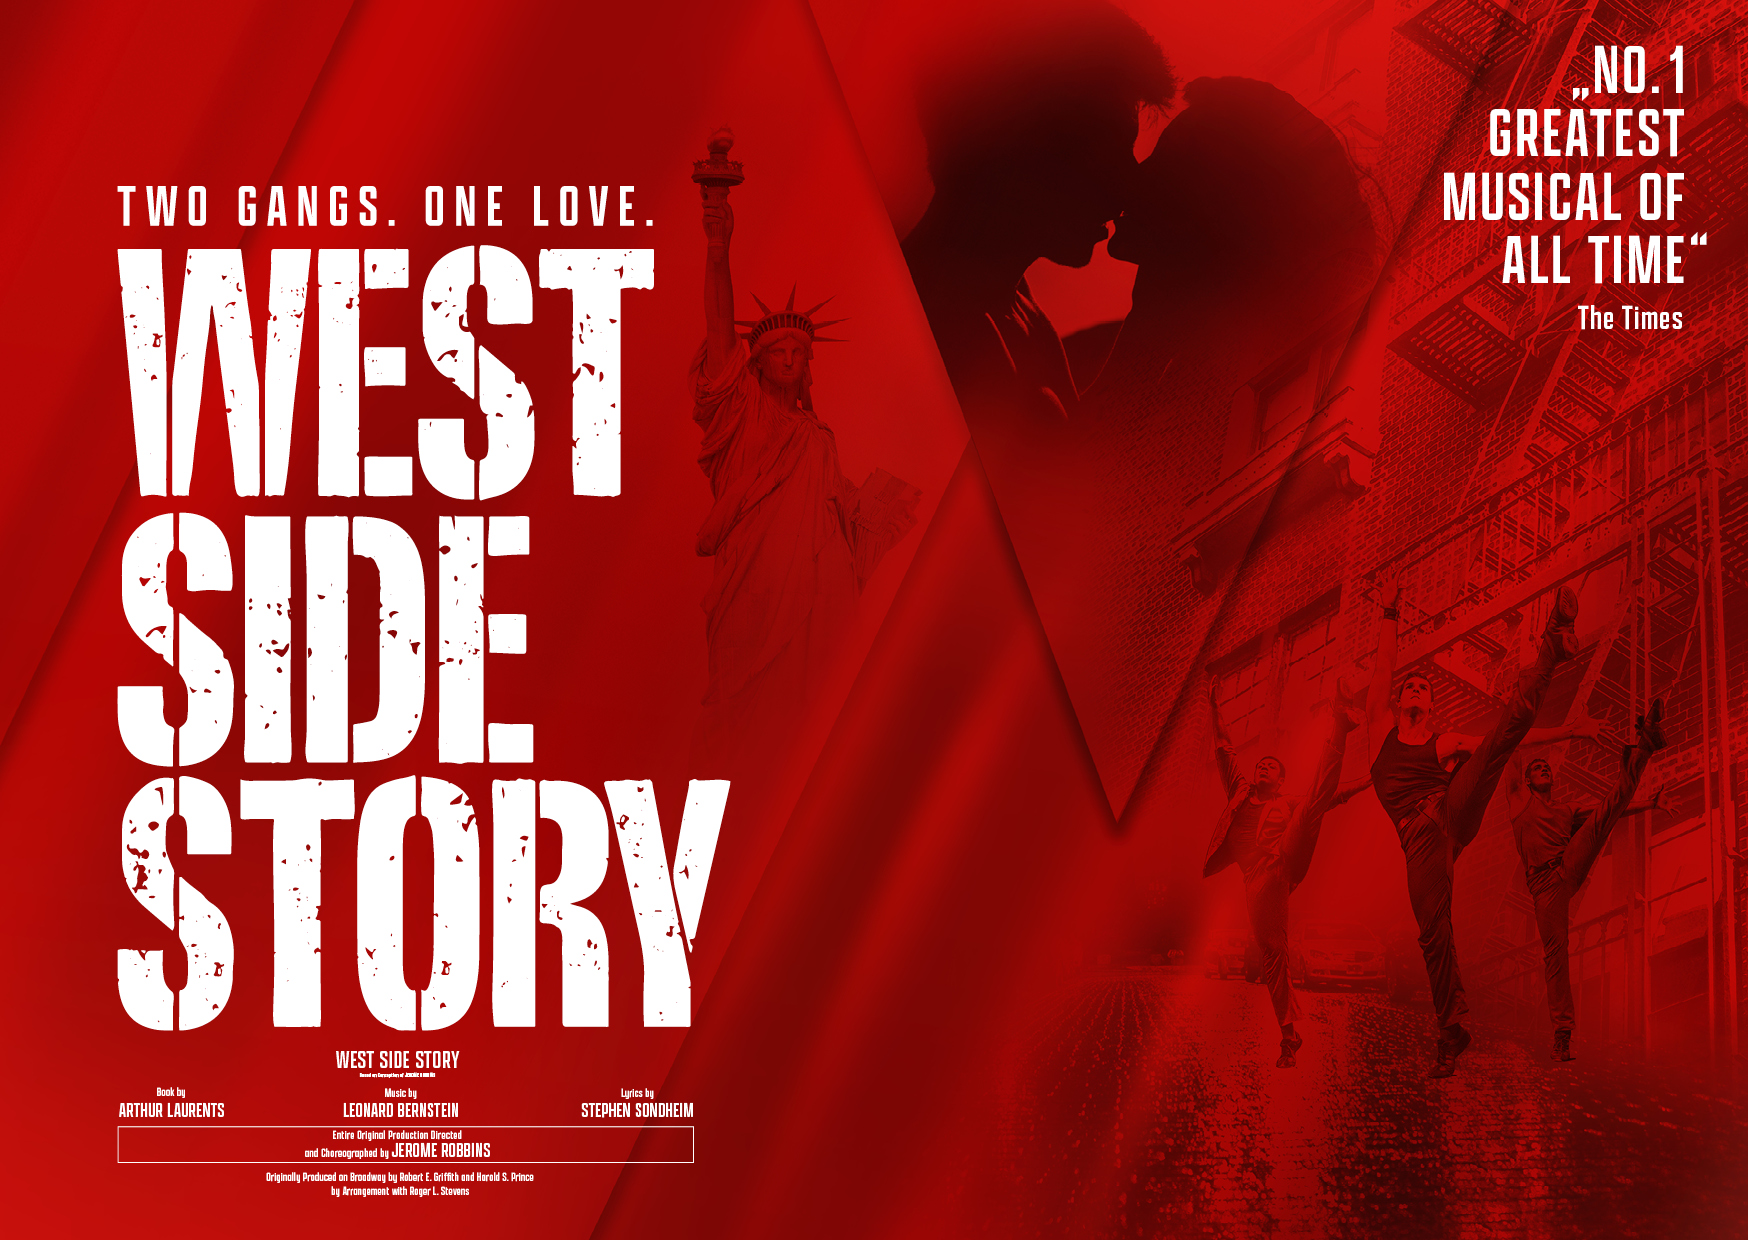 Production Stage Manager - West Side Story - International Tour